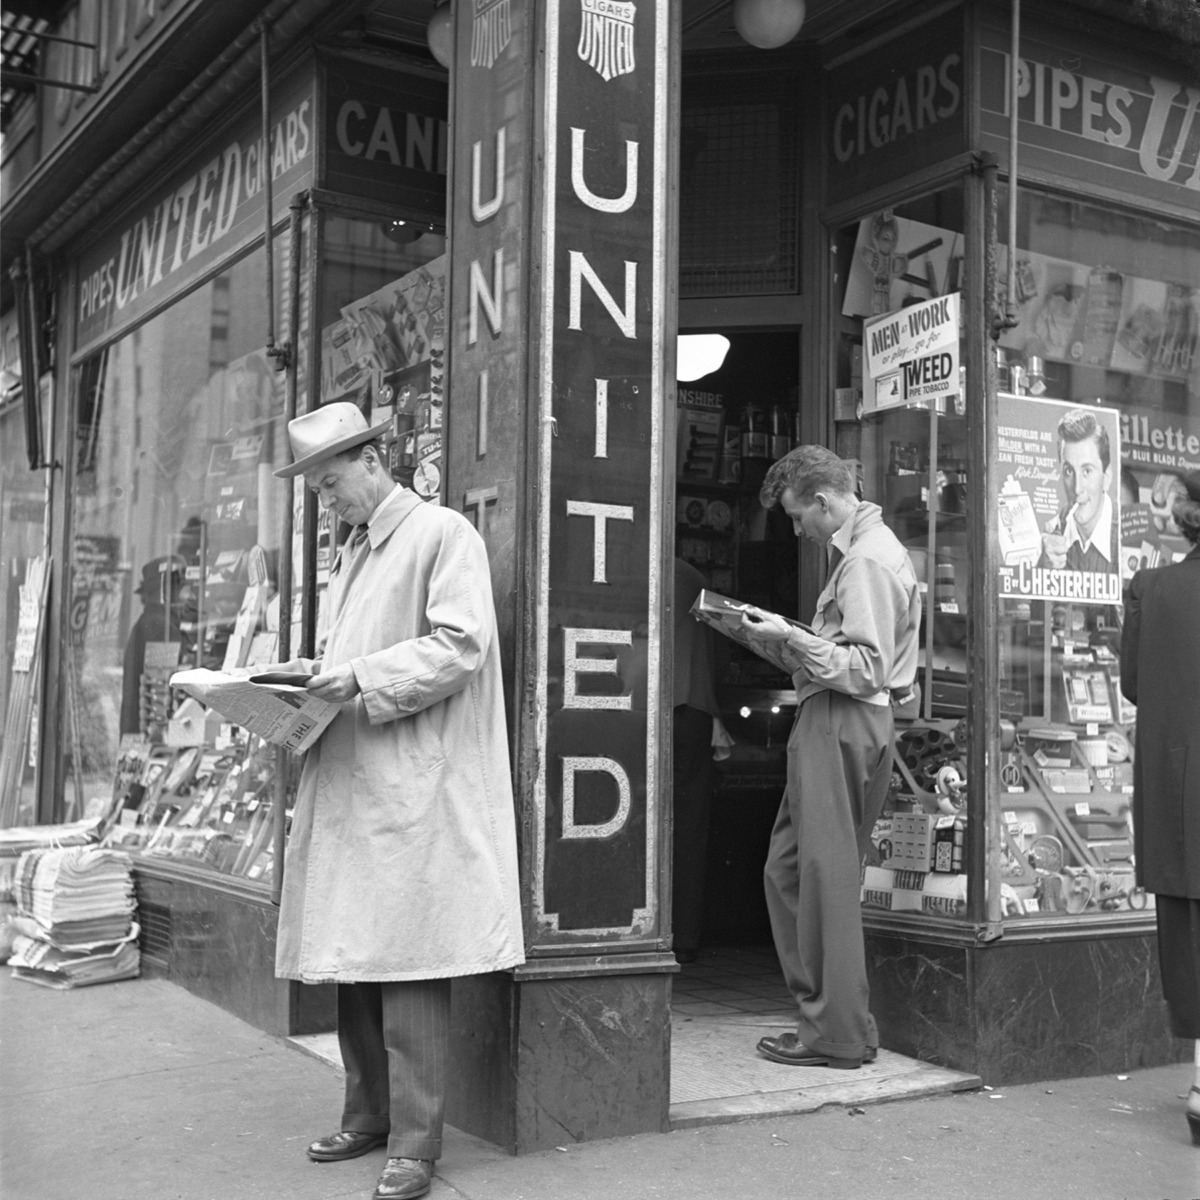 United Pipe and Cigar store, New York City, c. 1946-1950